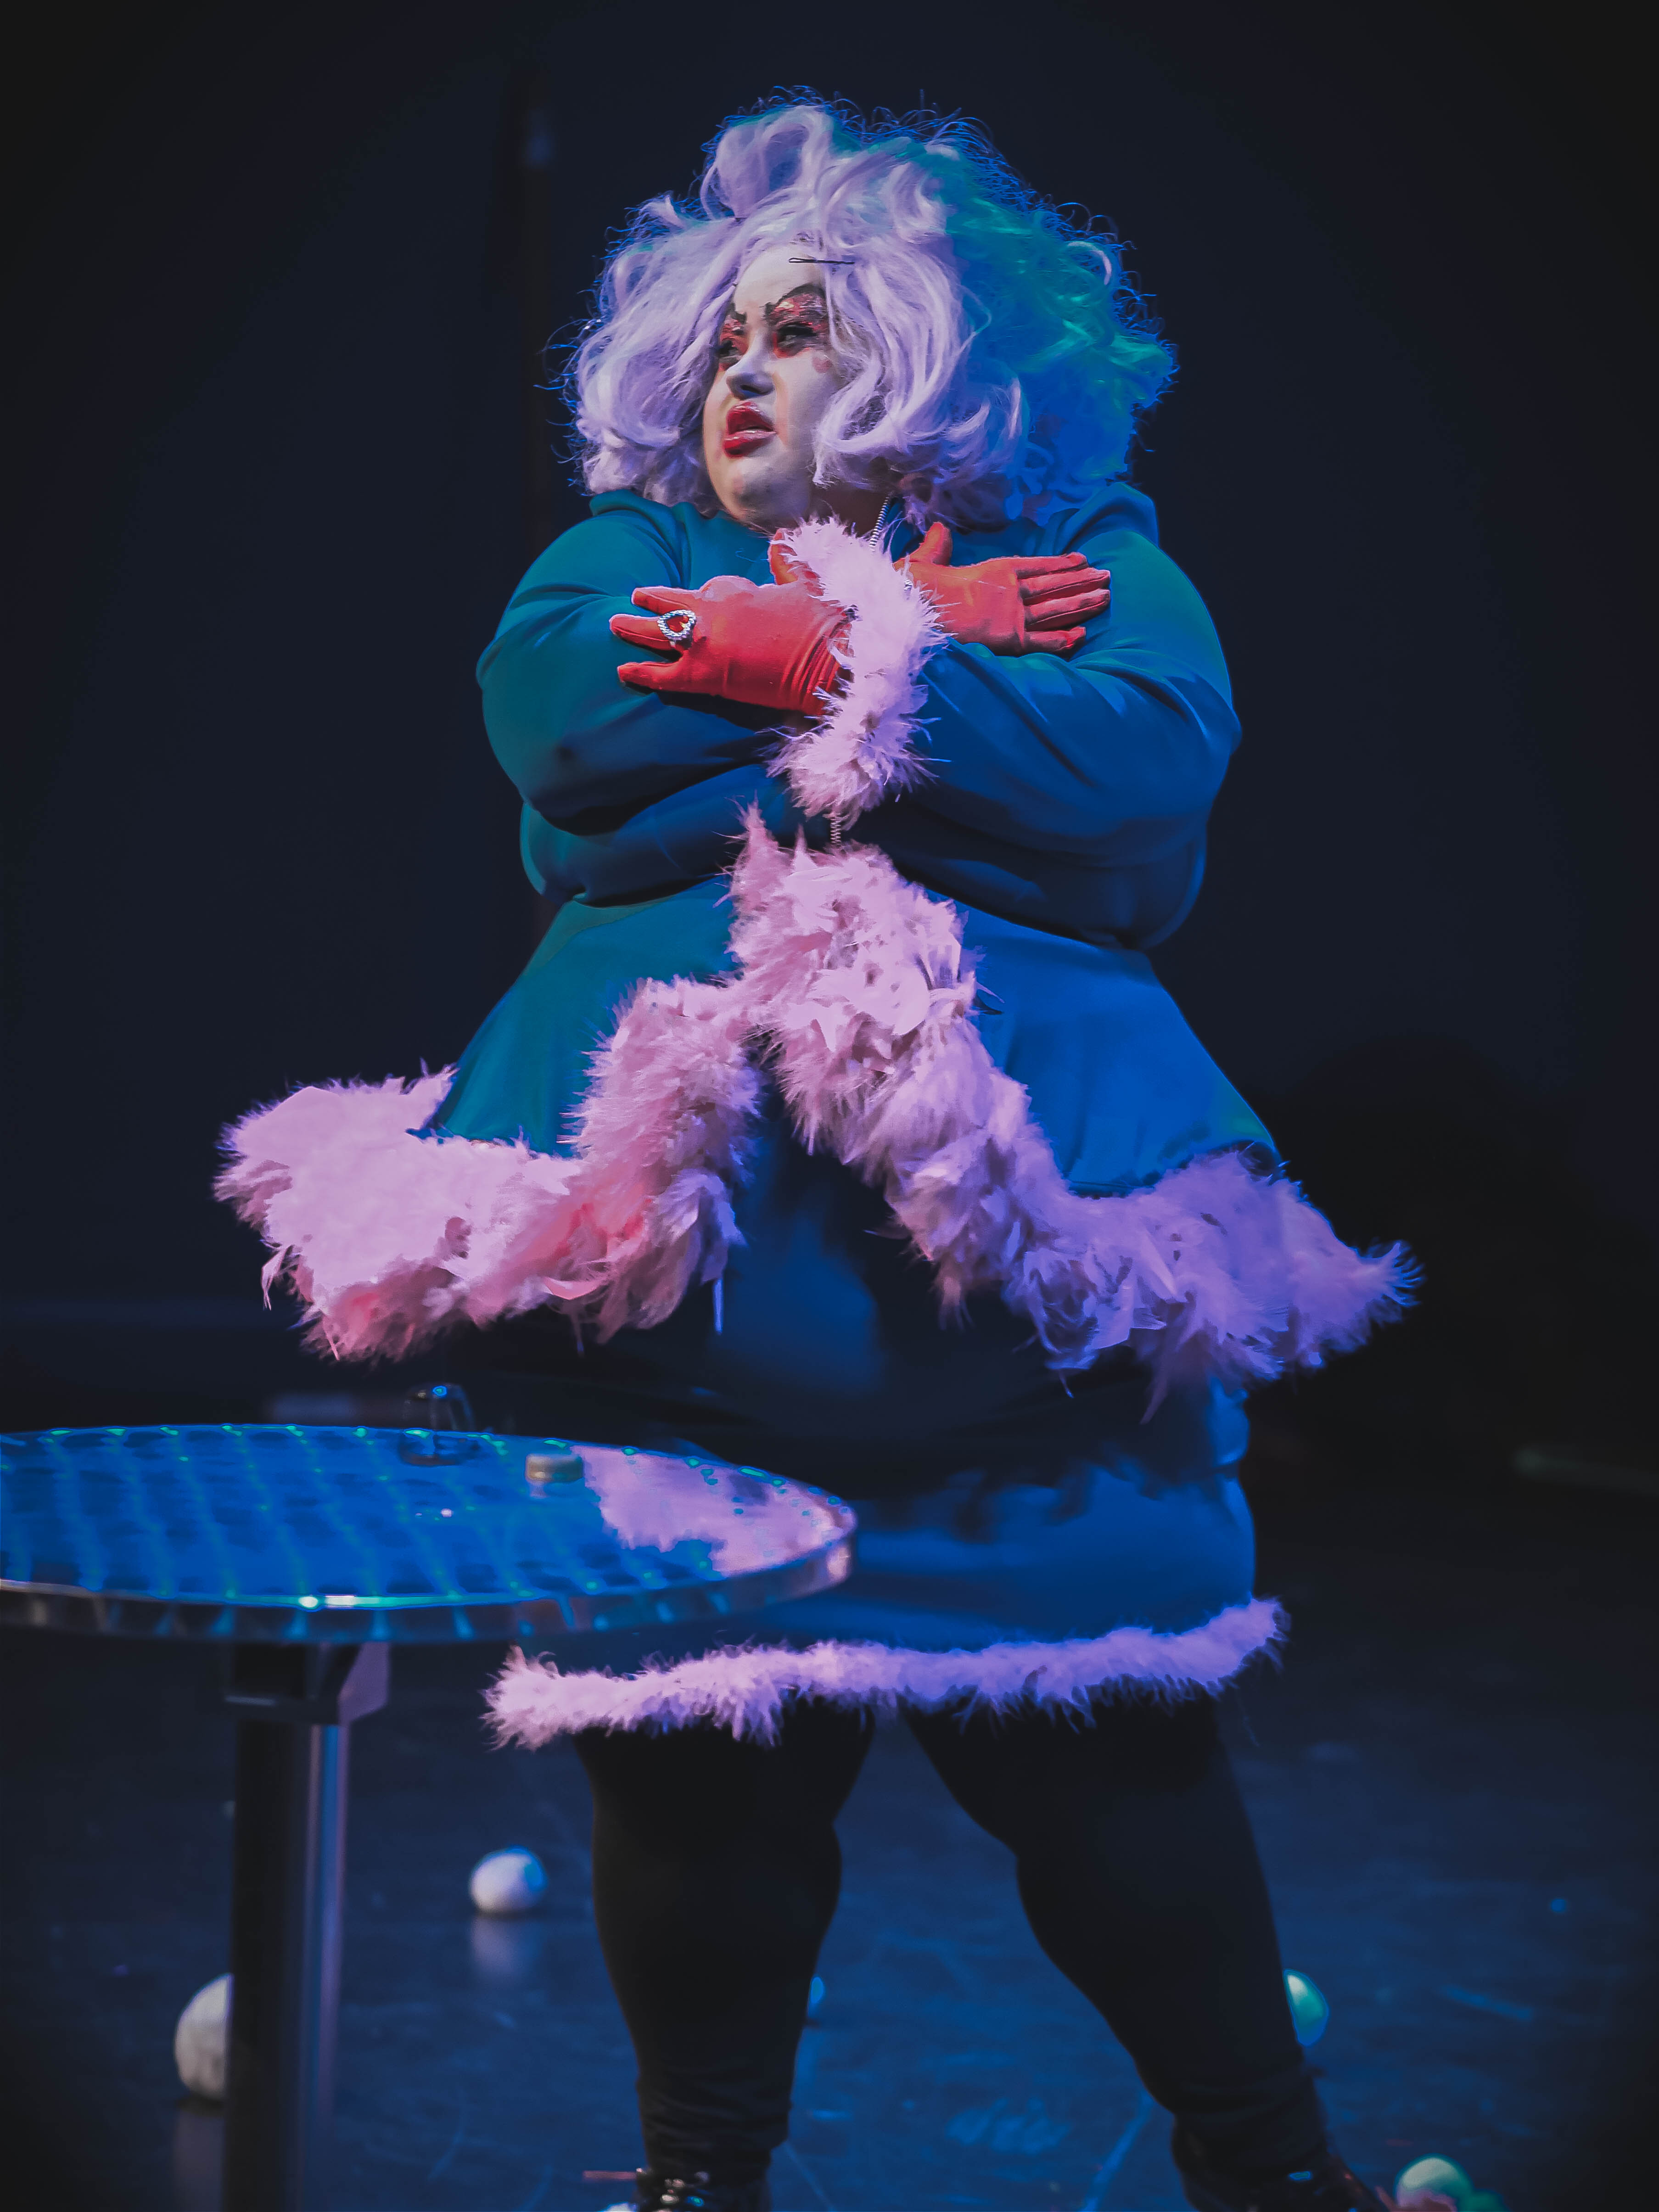 Miss Shade, drag queen from House of Deviant wearing a teal coloured peplum suit with pink feathers and a lilac wig.